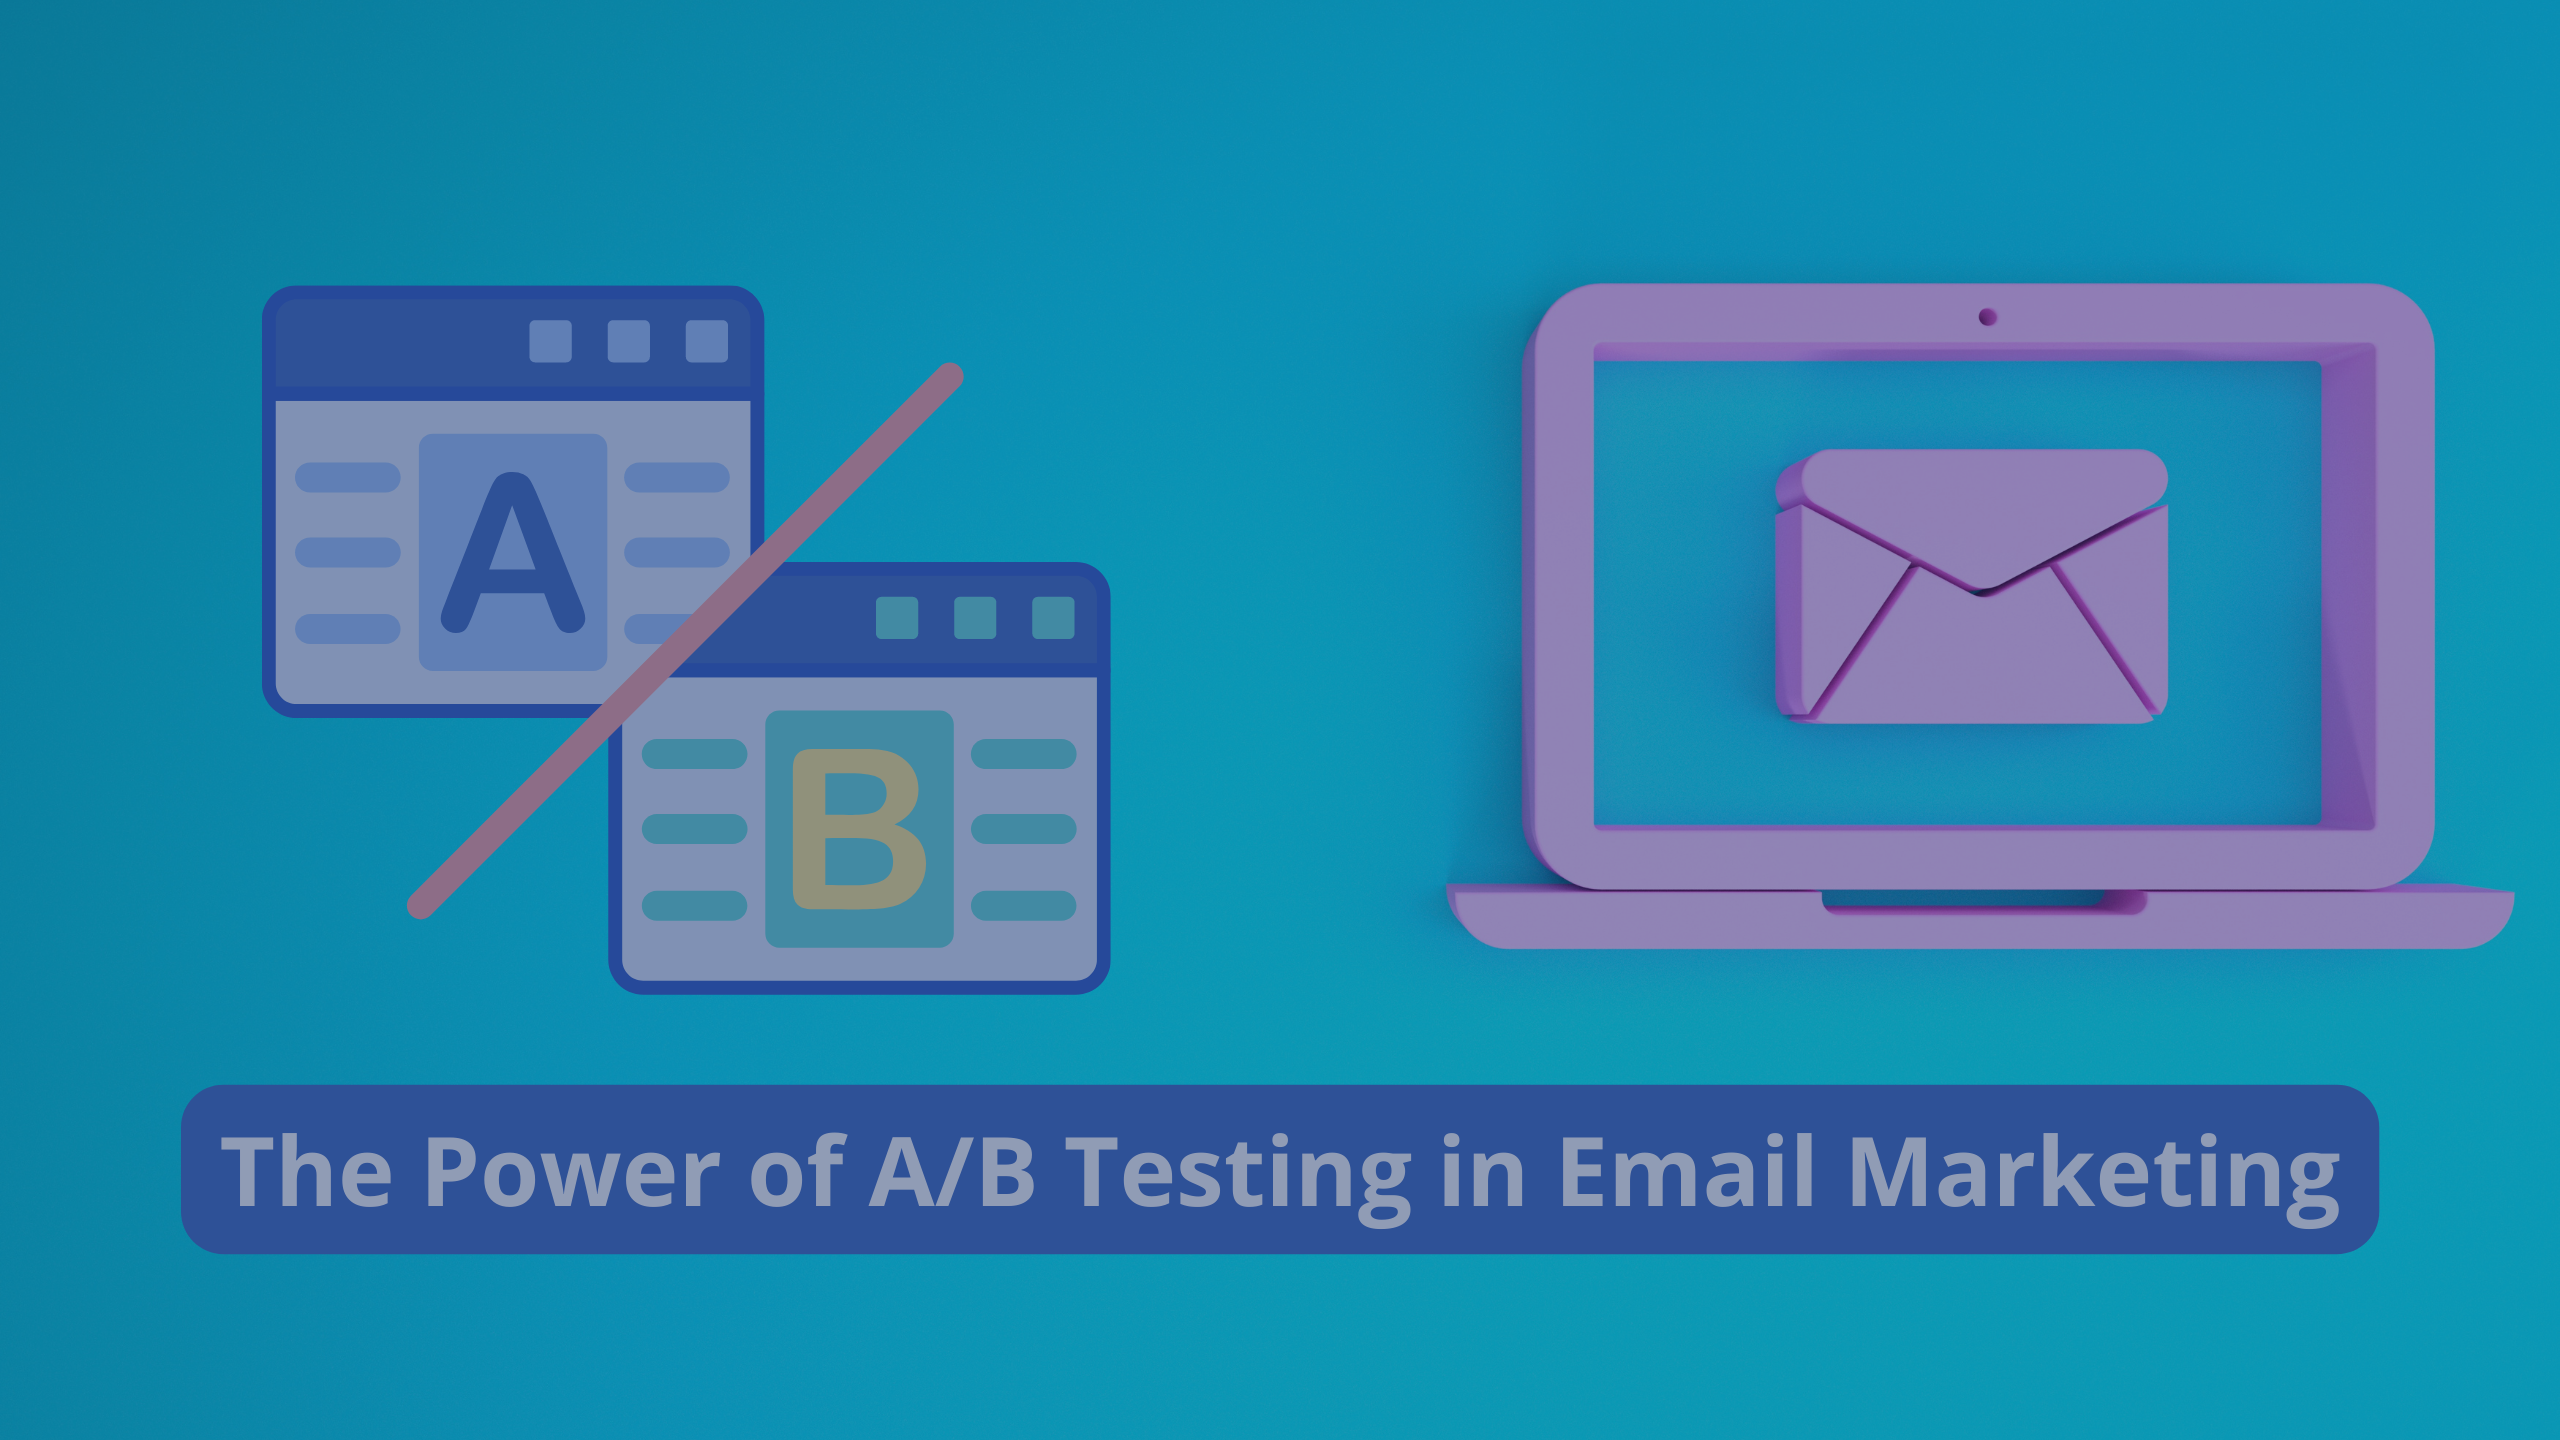 The Power of AB Testing in Email Marketing